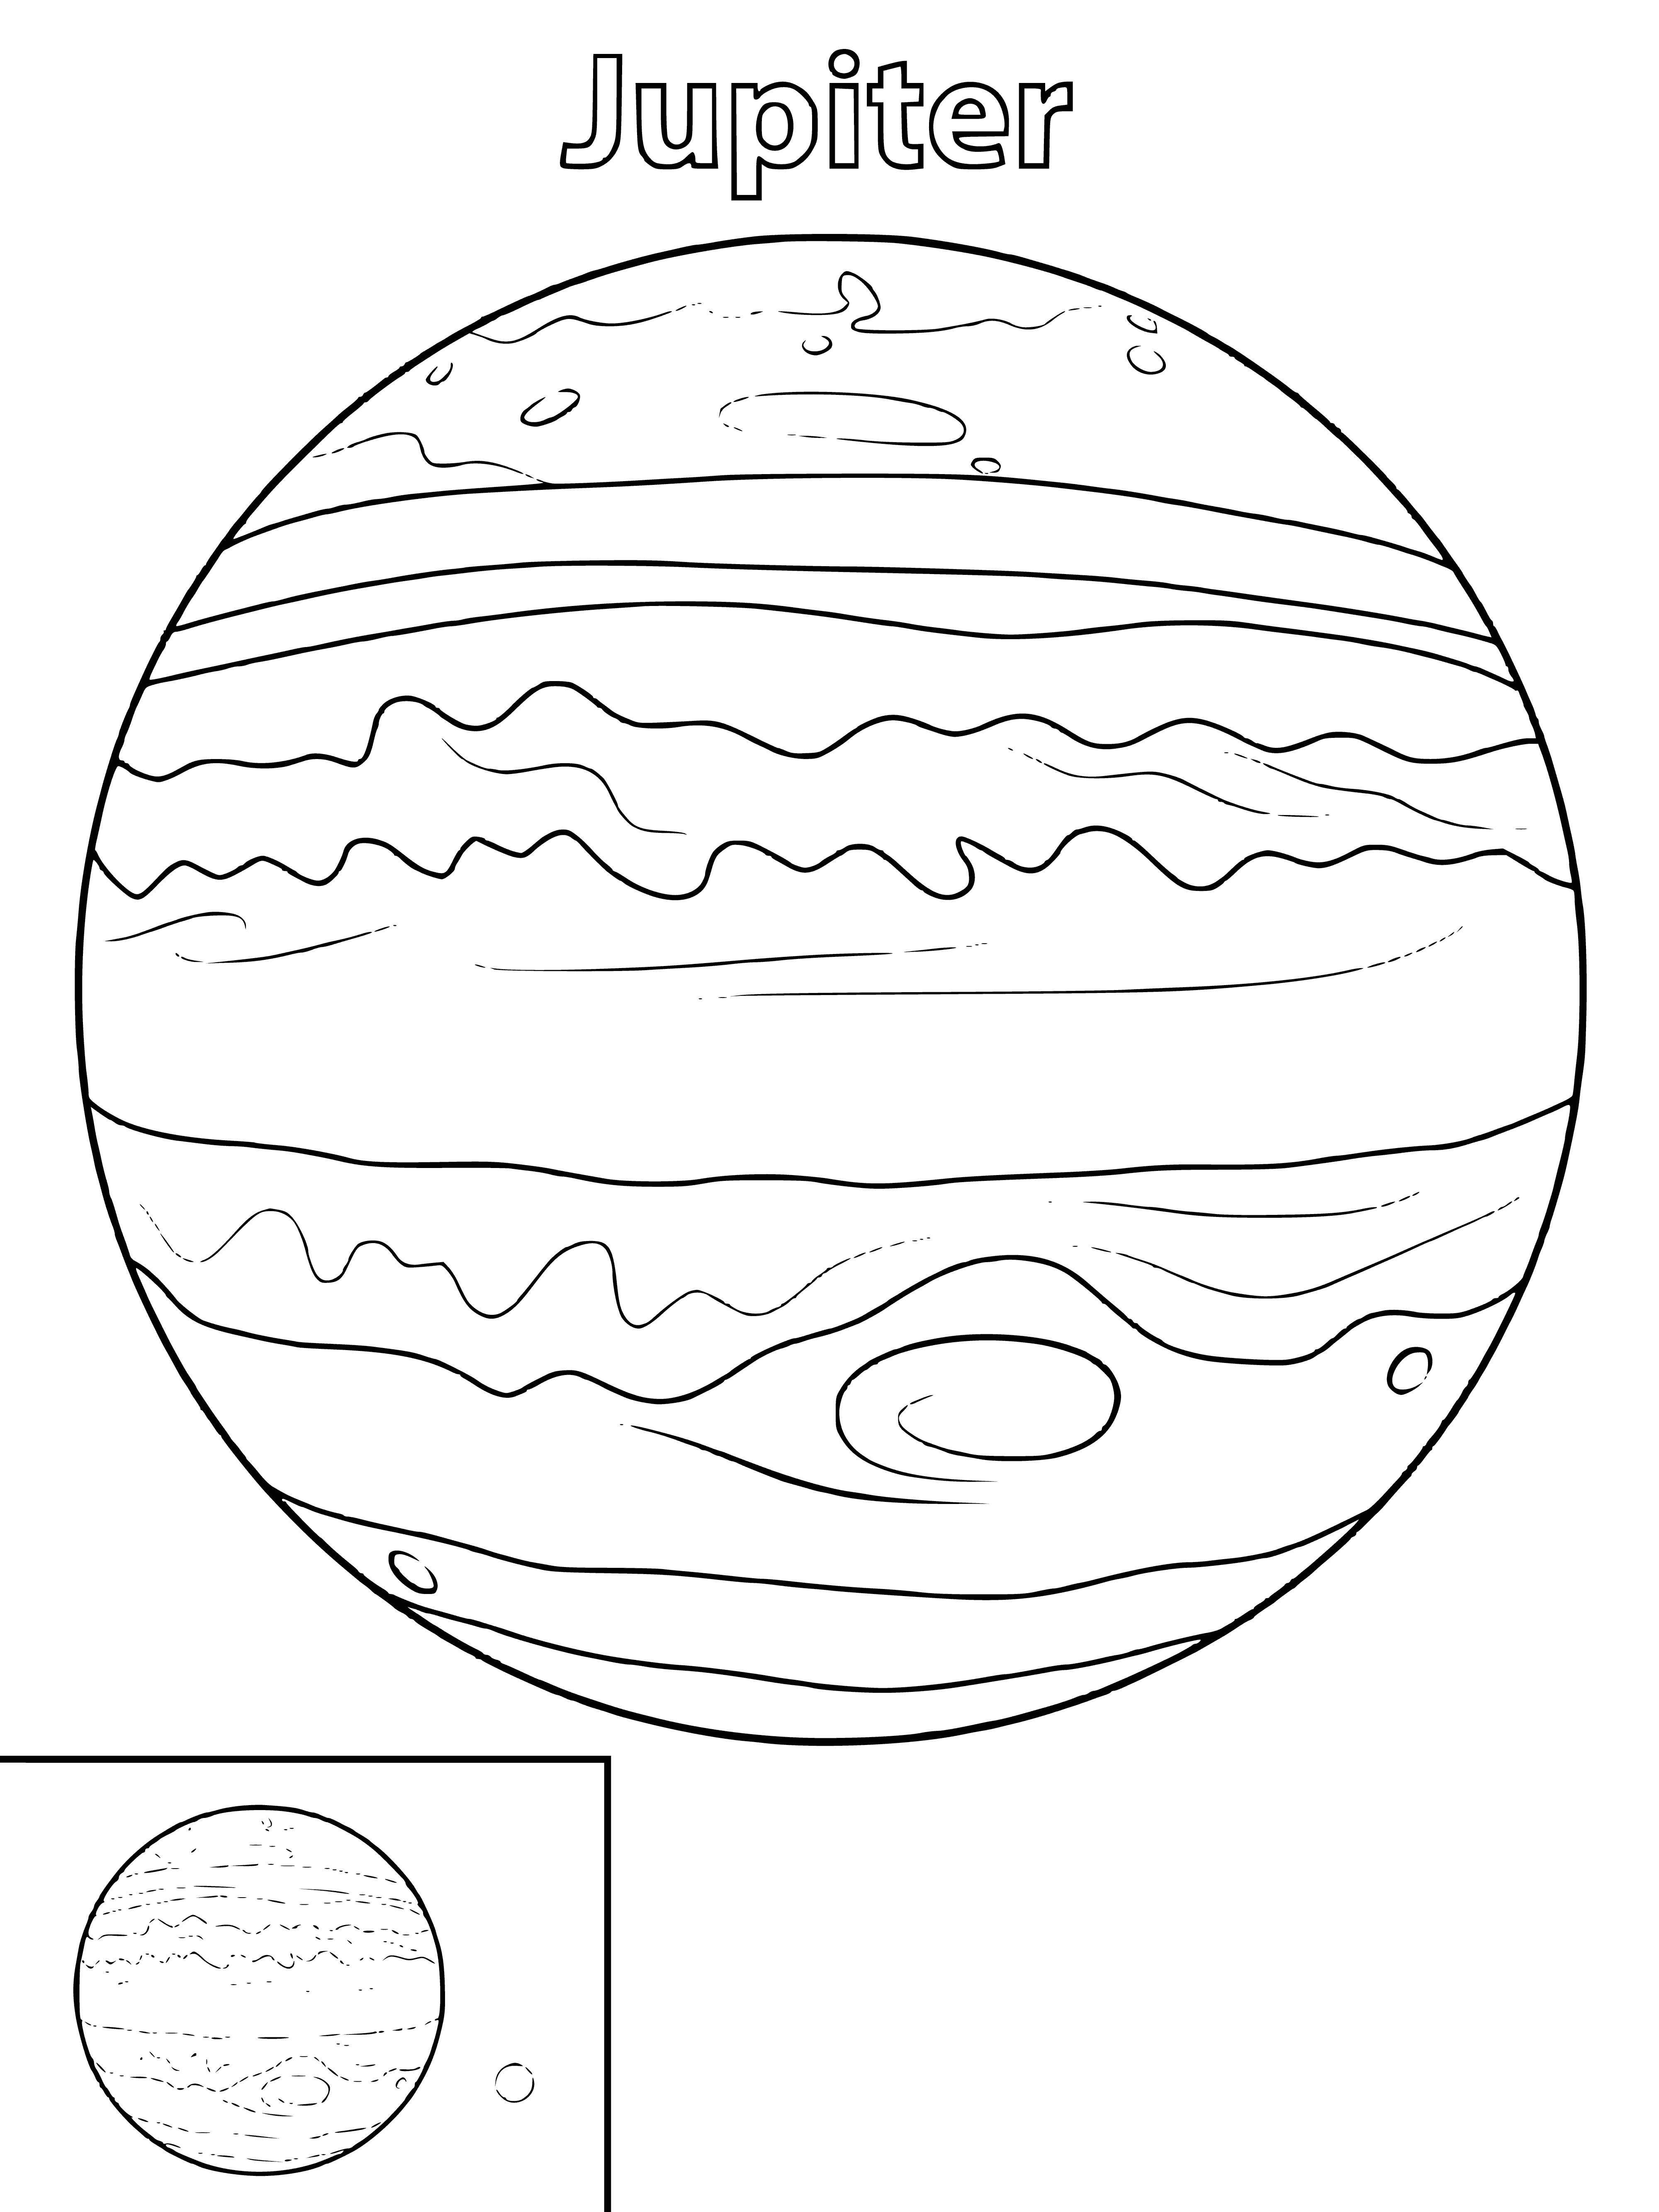 coloring page: Large, red-orange planet with lighter stripes & white dots in black, starry sky background.